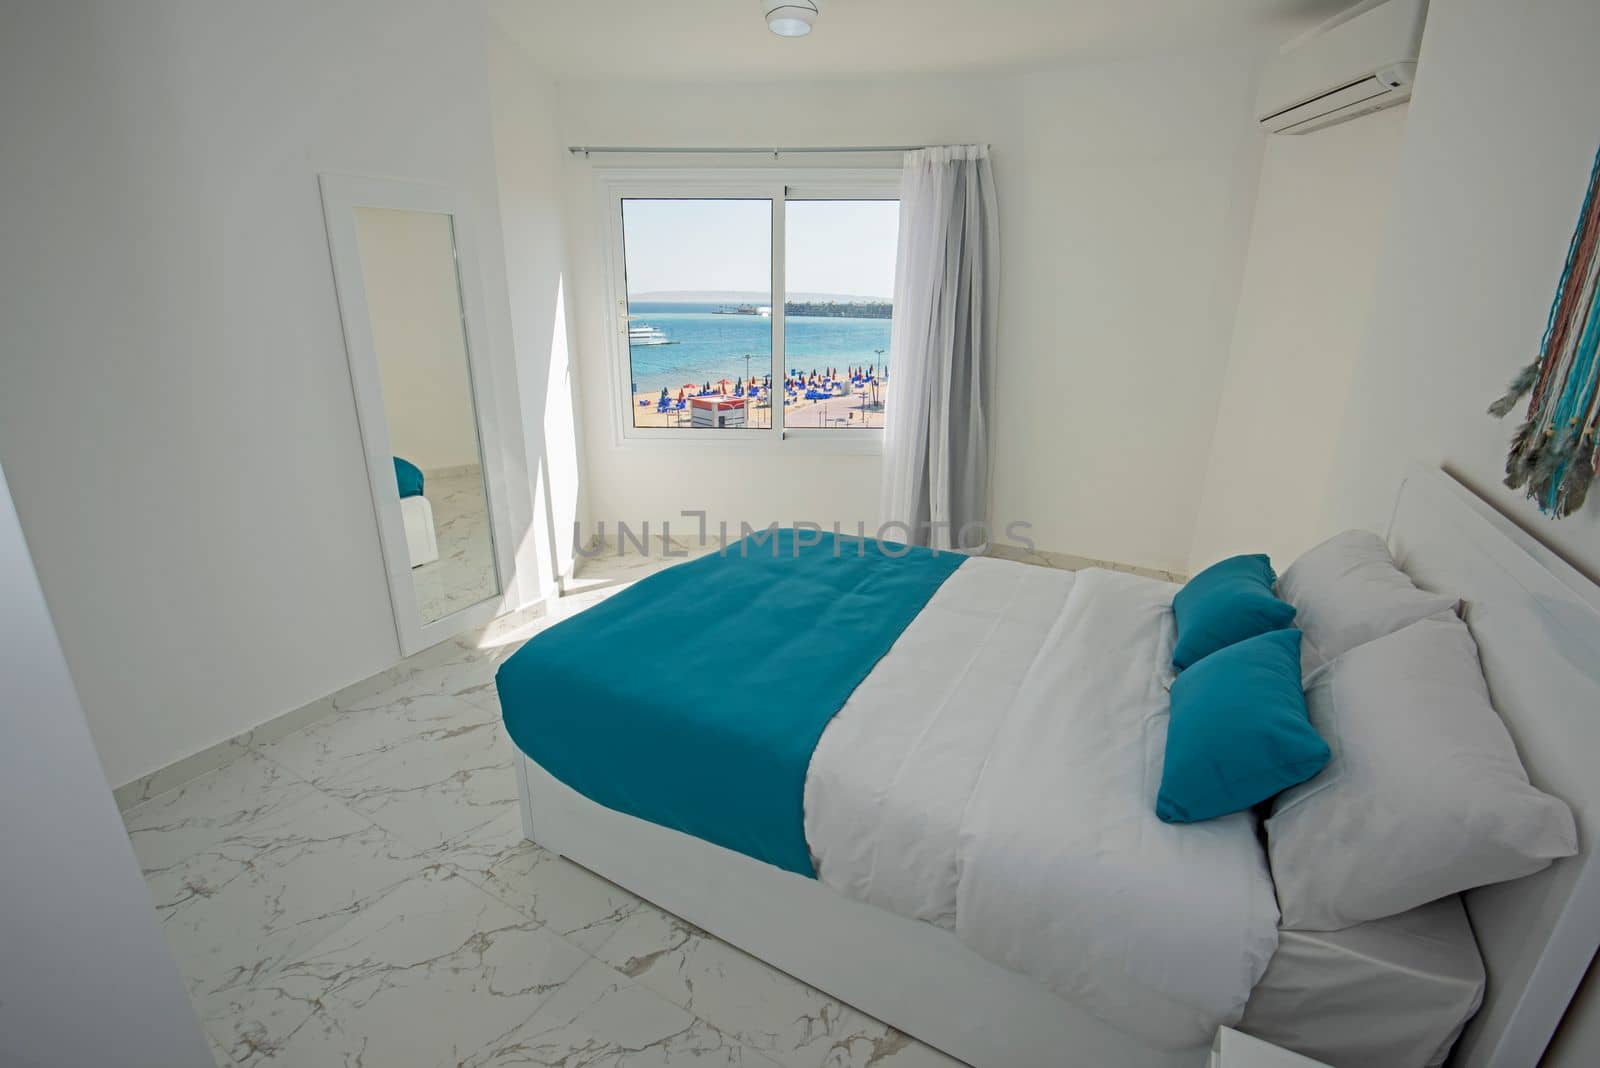 Interior design decor furnishing of luxury show home bedroom showing furniture and double bed in resort with sea view from window